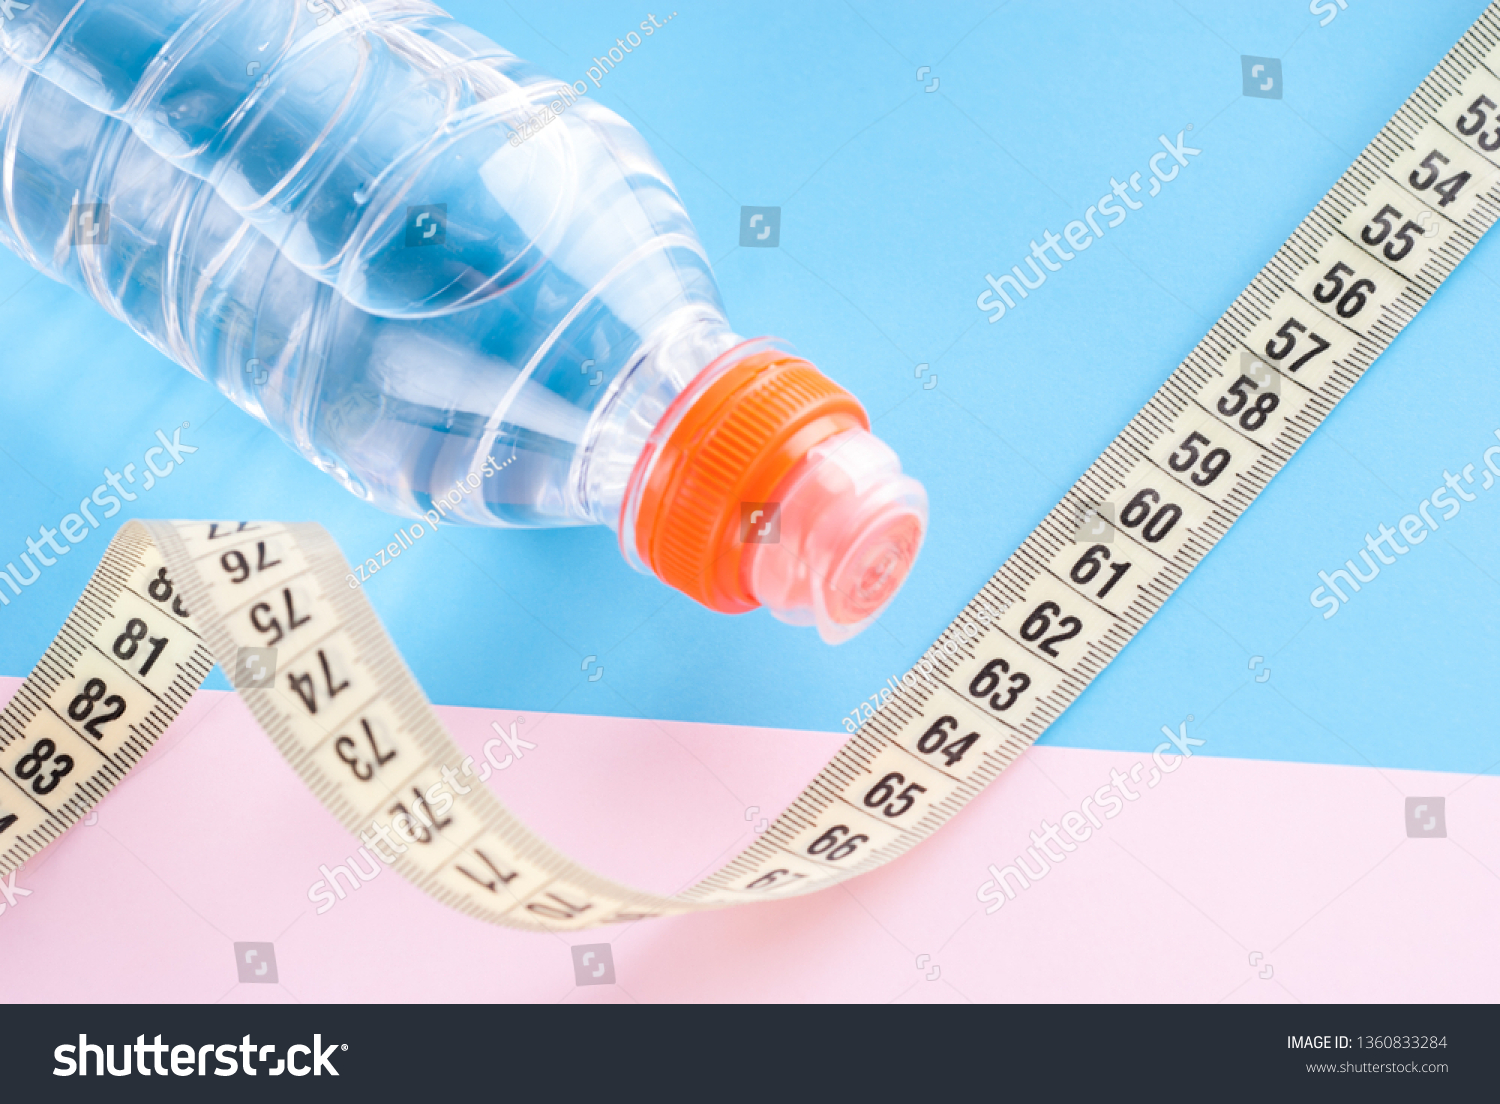 Download Bottle Water Measuring Tape Yellow Measuring Sports Recreation Stock Image 1360833284 Yellowimages Mockups